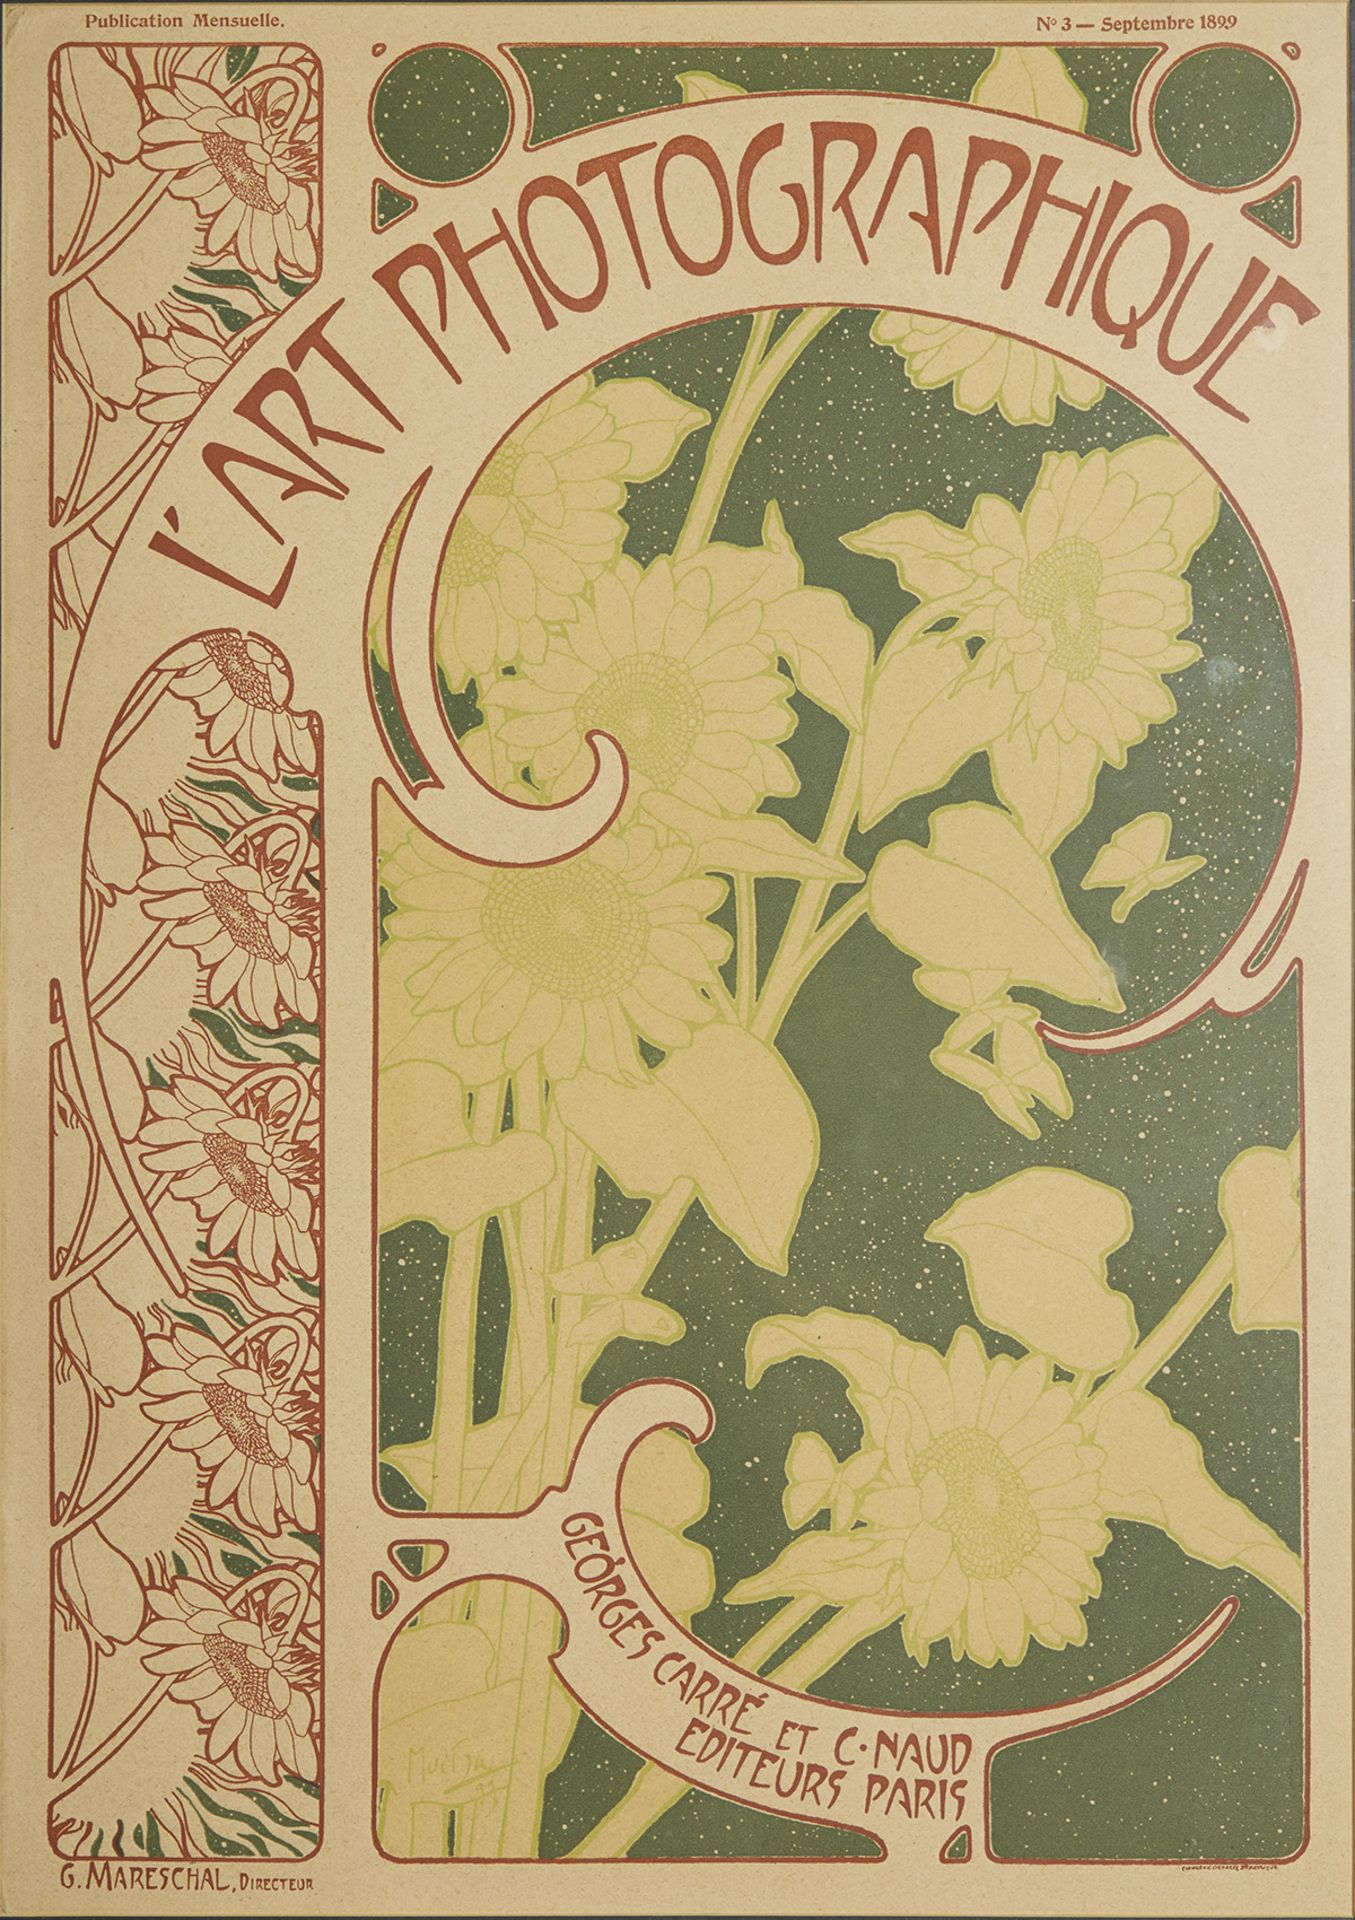 L'art Photographique Cover By Alphonse Mucha 1889 - Image 2 of 6